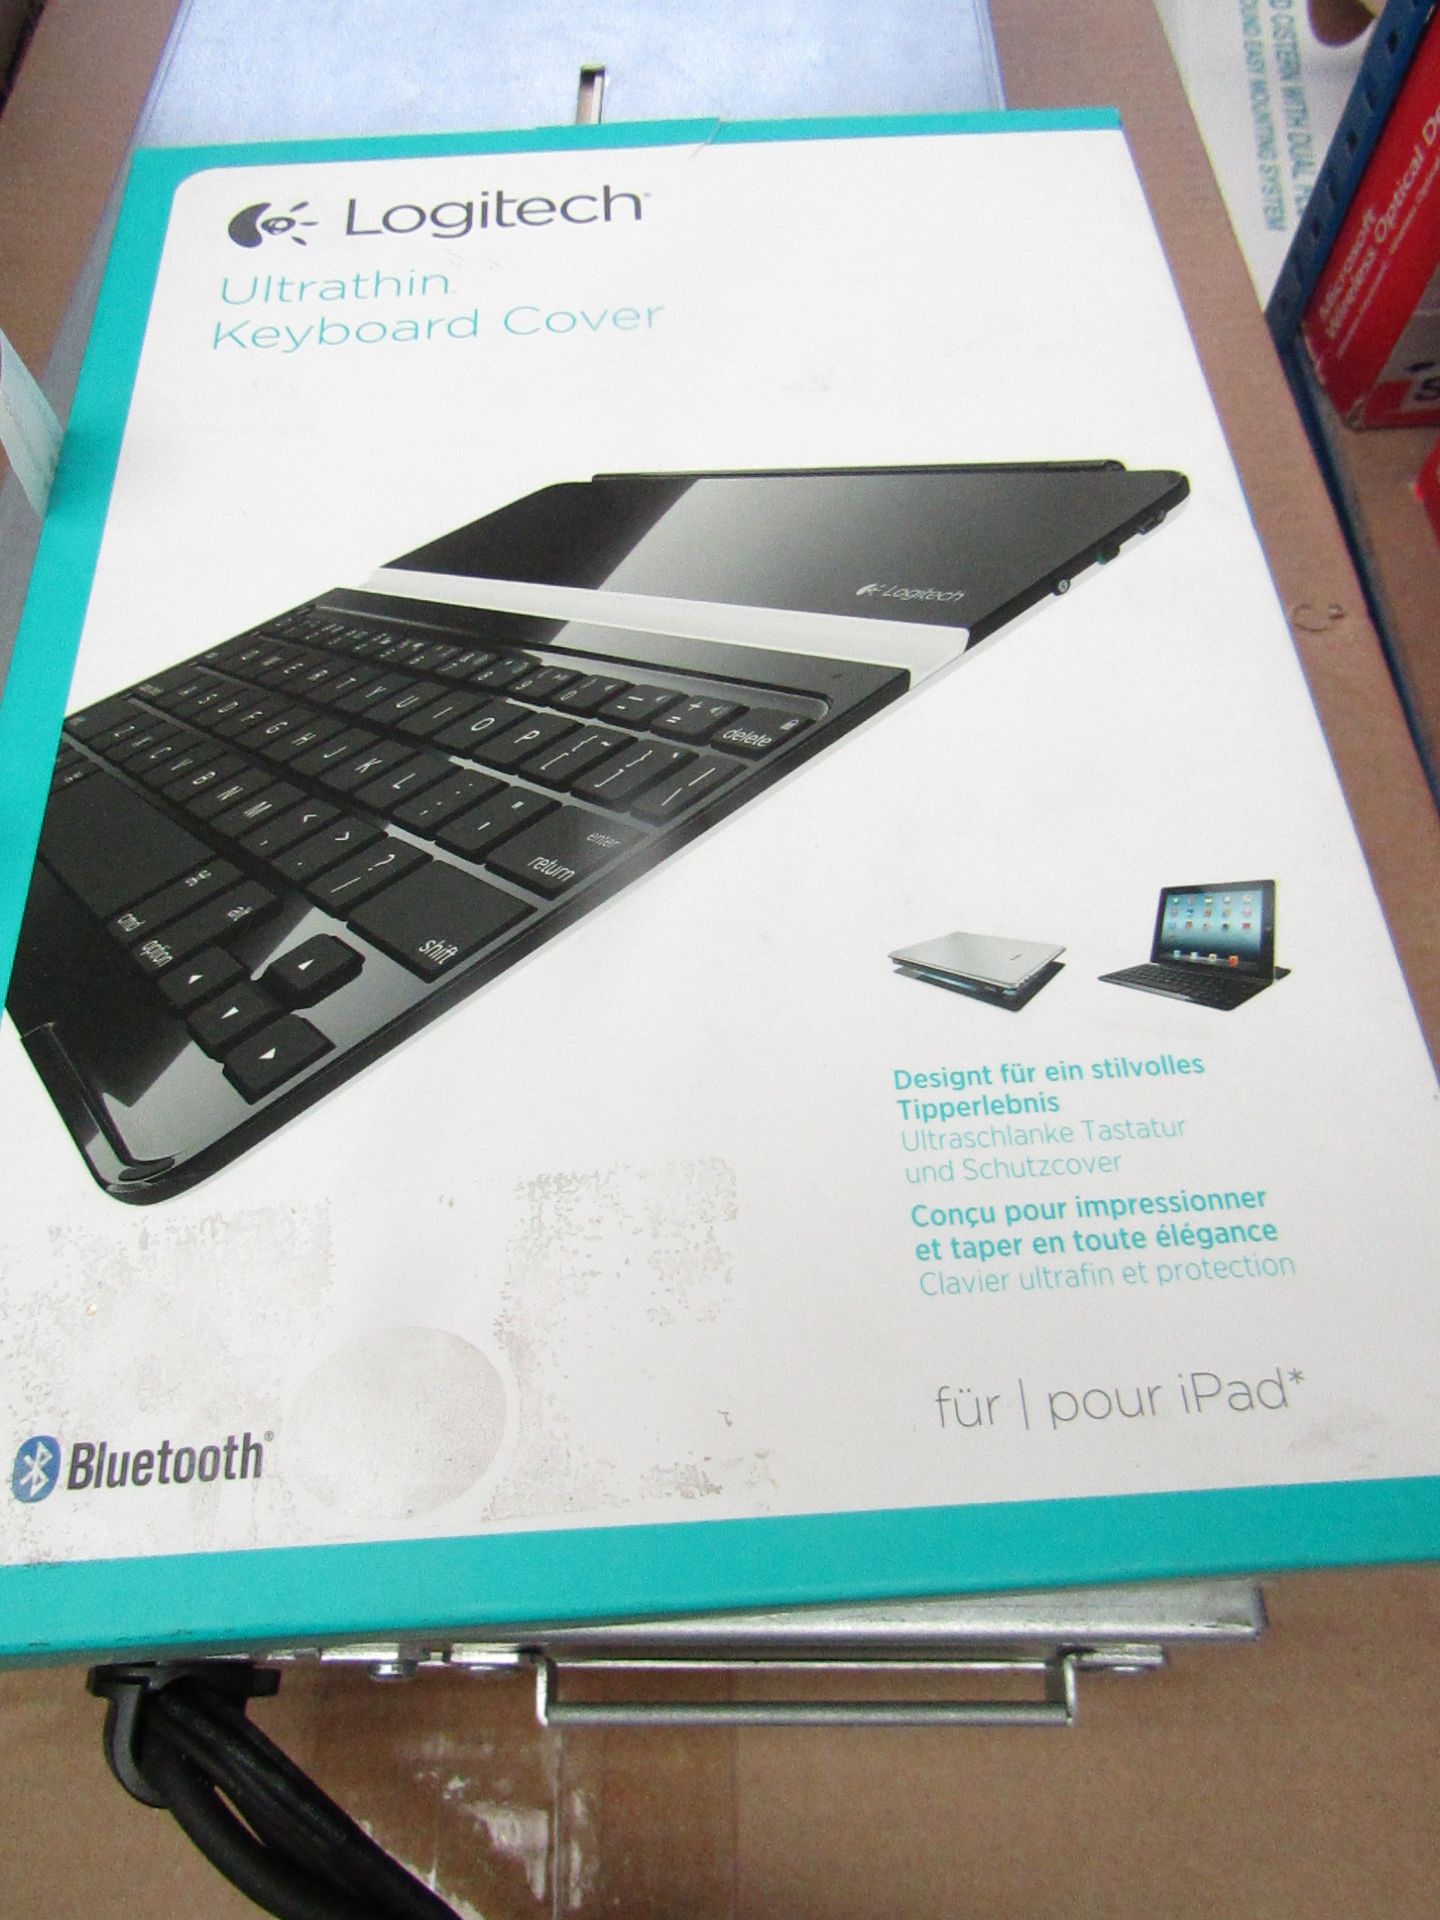 Logitech thin keyboard cover, untested and boxed.